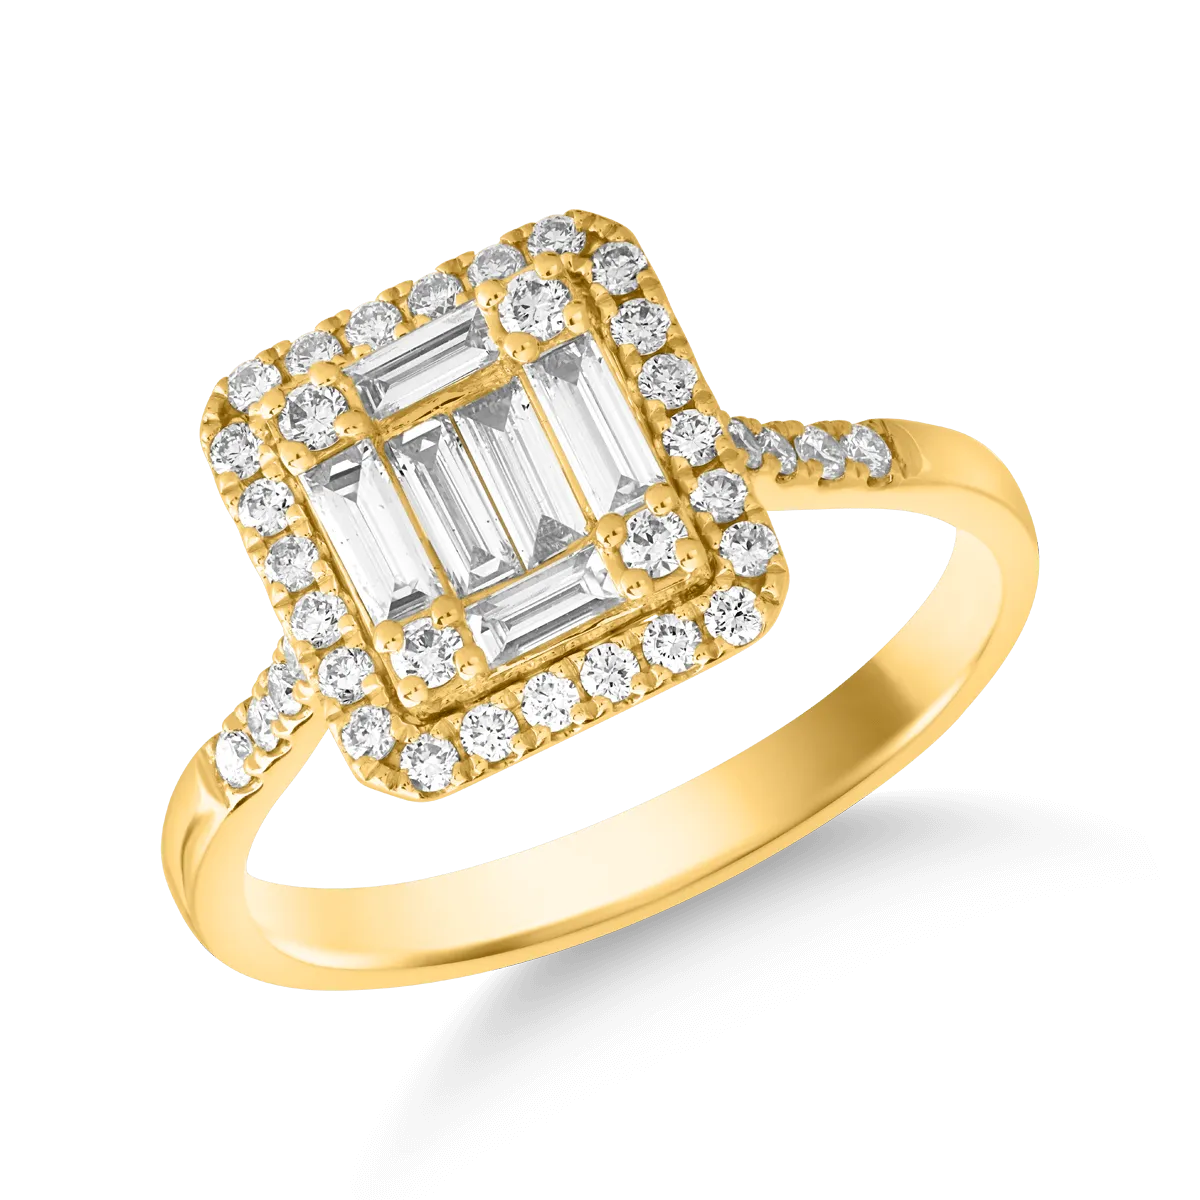 18K yellow gold ring with diamonds of 0.8ct